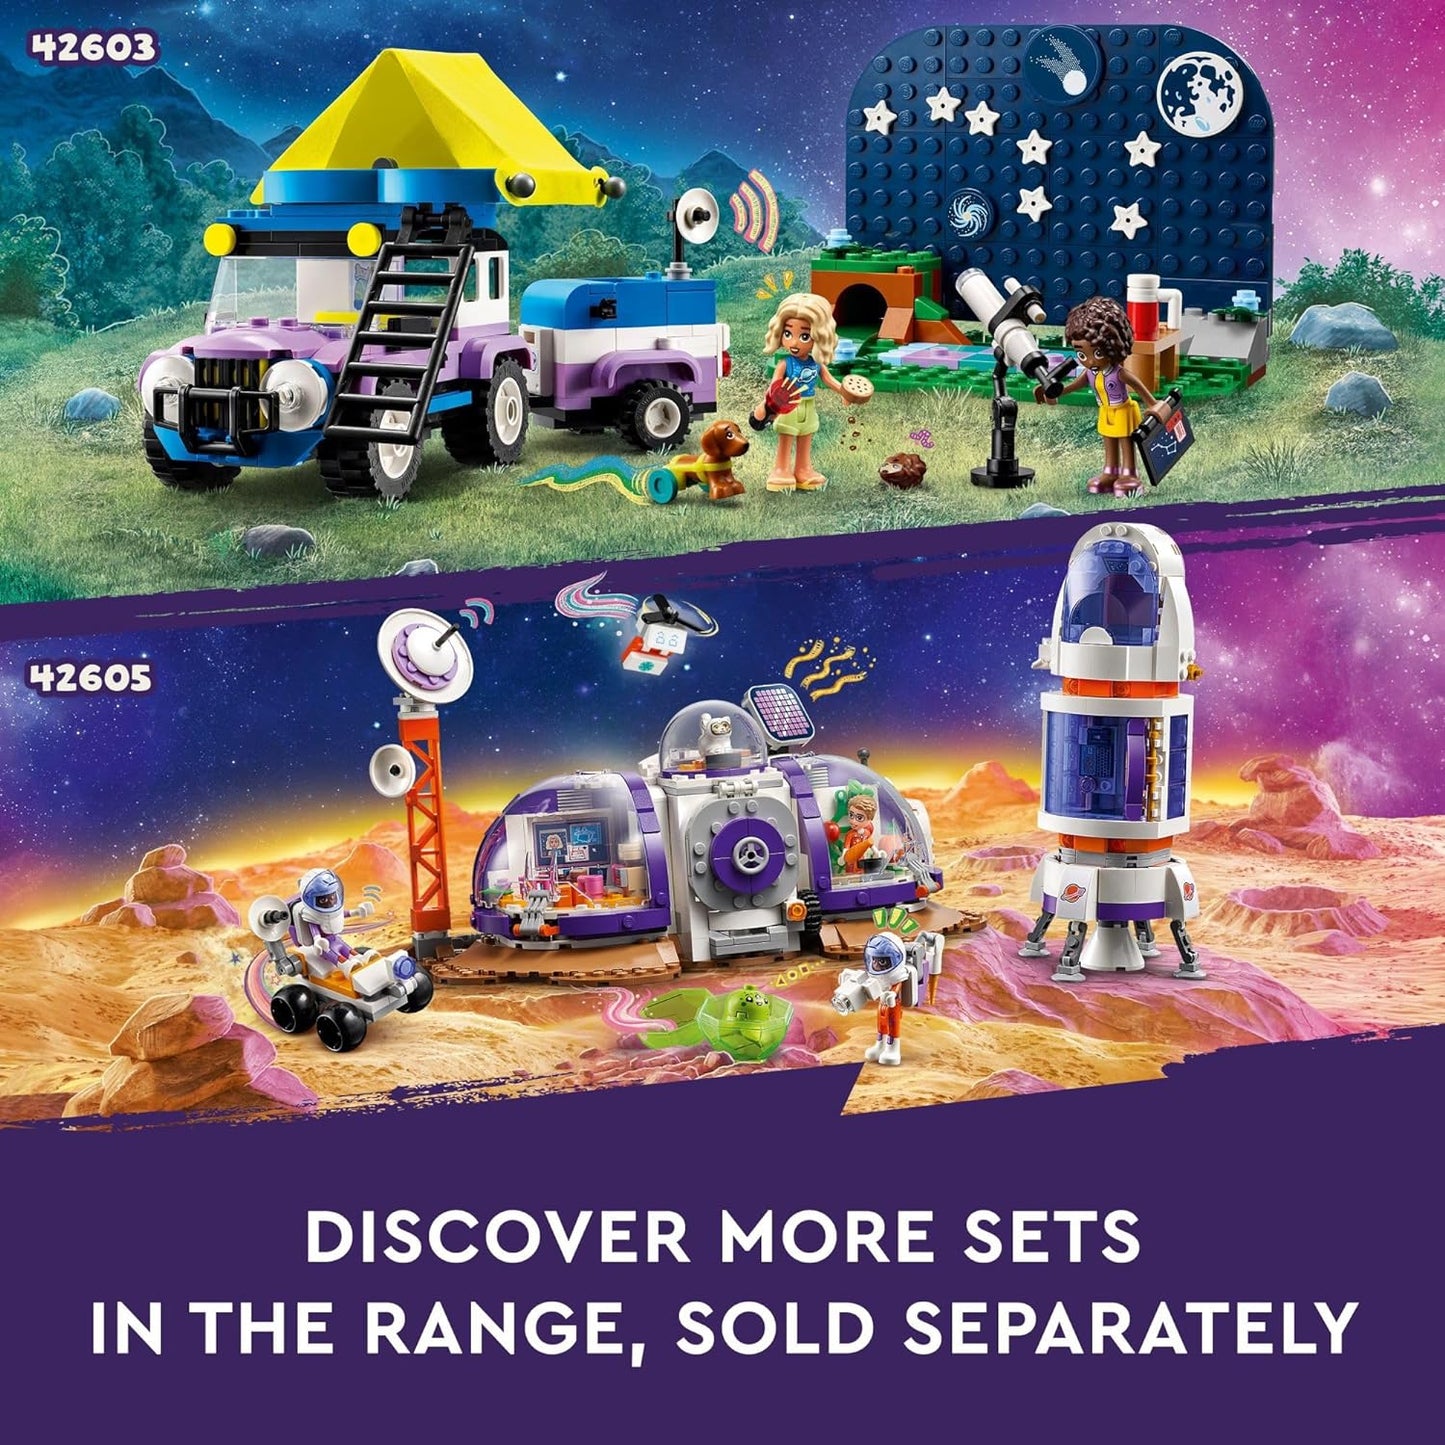 LEGO Friends Mars Space Base and Rocket Set, Science Toy for Pretend Play with 3 Mini-Dolls and Spaceship Toy, Gift for Girls, Boys and Kids Ages 8 and Up who Love Tech and Outer Space Toys, 42605